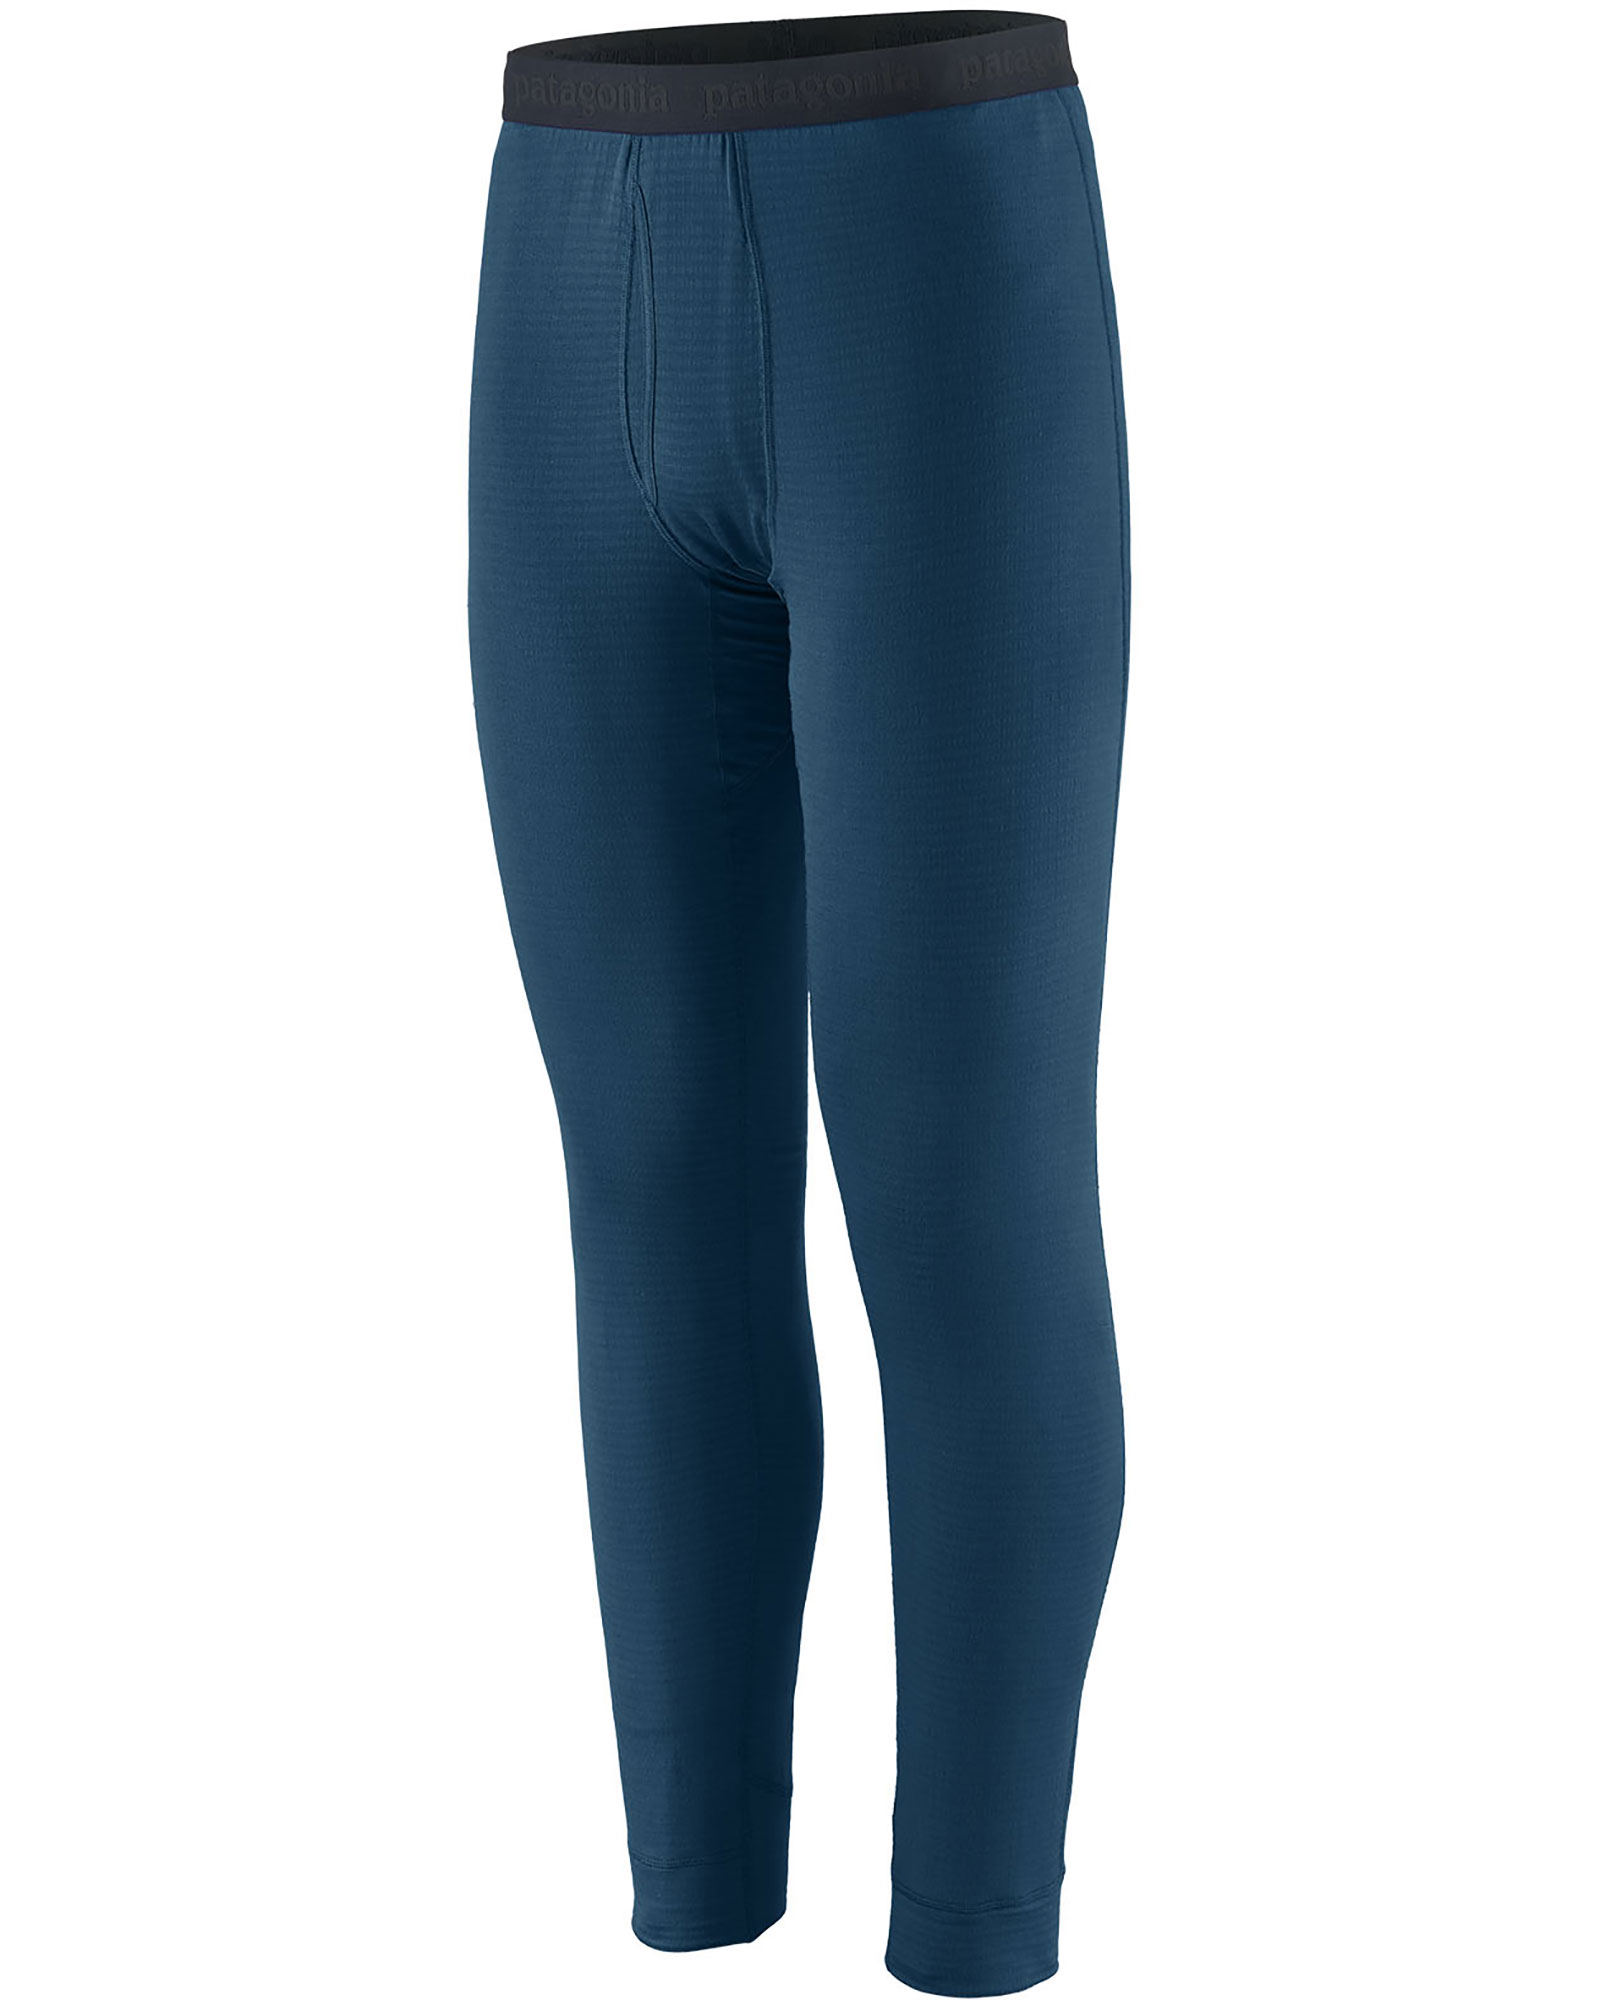 Patagonia Capilene Men’s Thermal Weight Tights - Lagoon Blue M